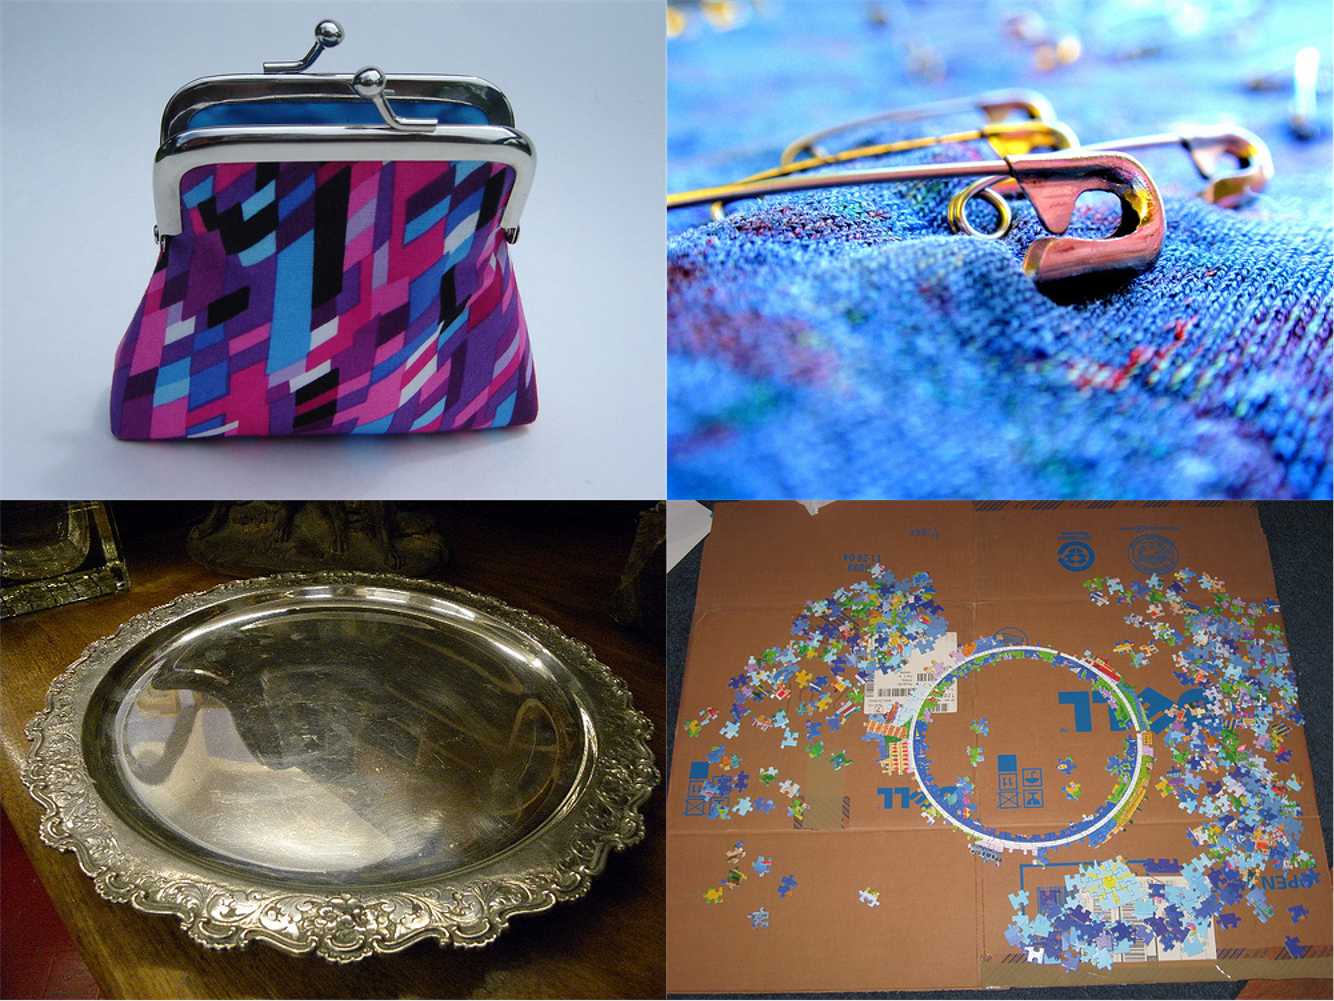 The easiest categories to mimic: ImageNet images of a purse, a safety pin, a jigsaw puzzle, and a tray.